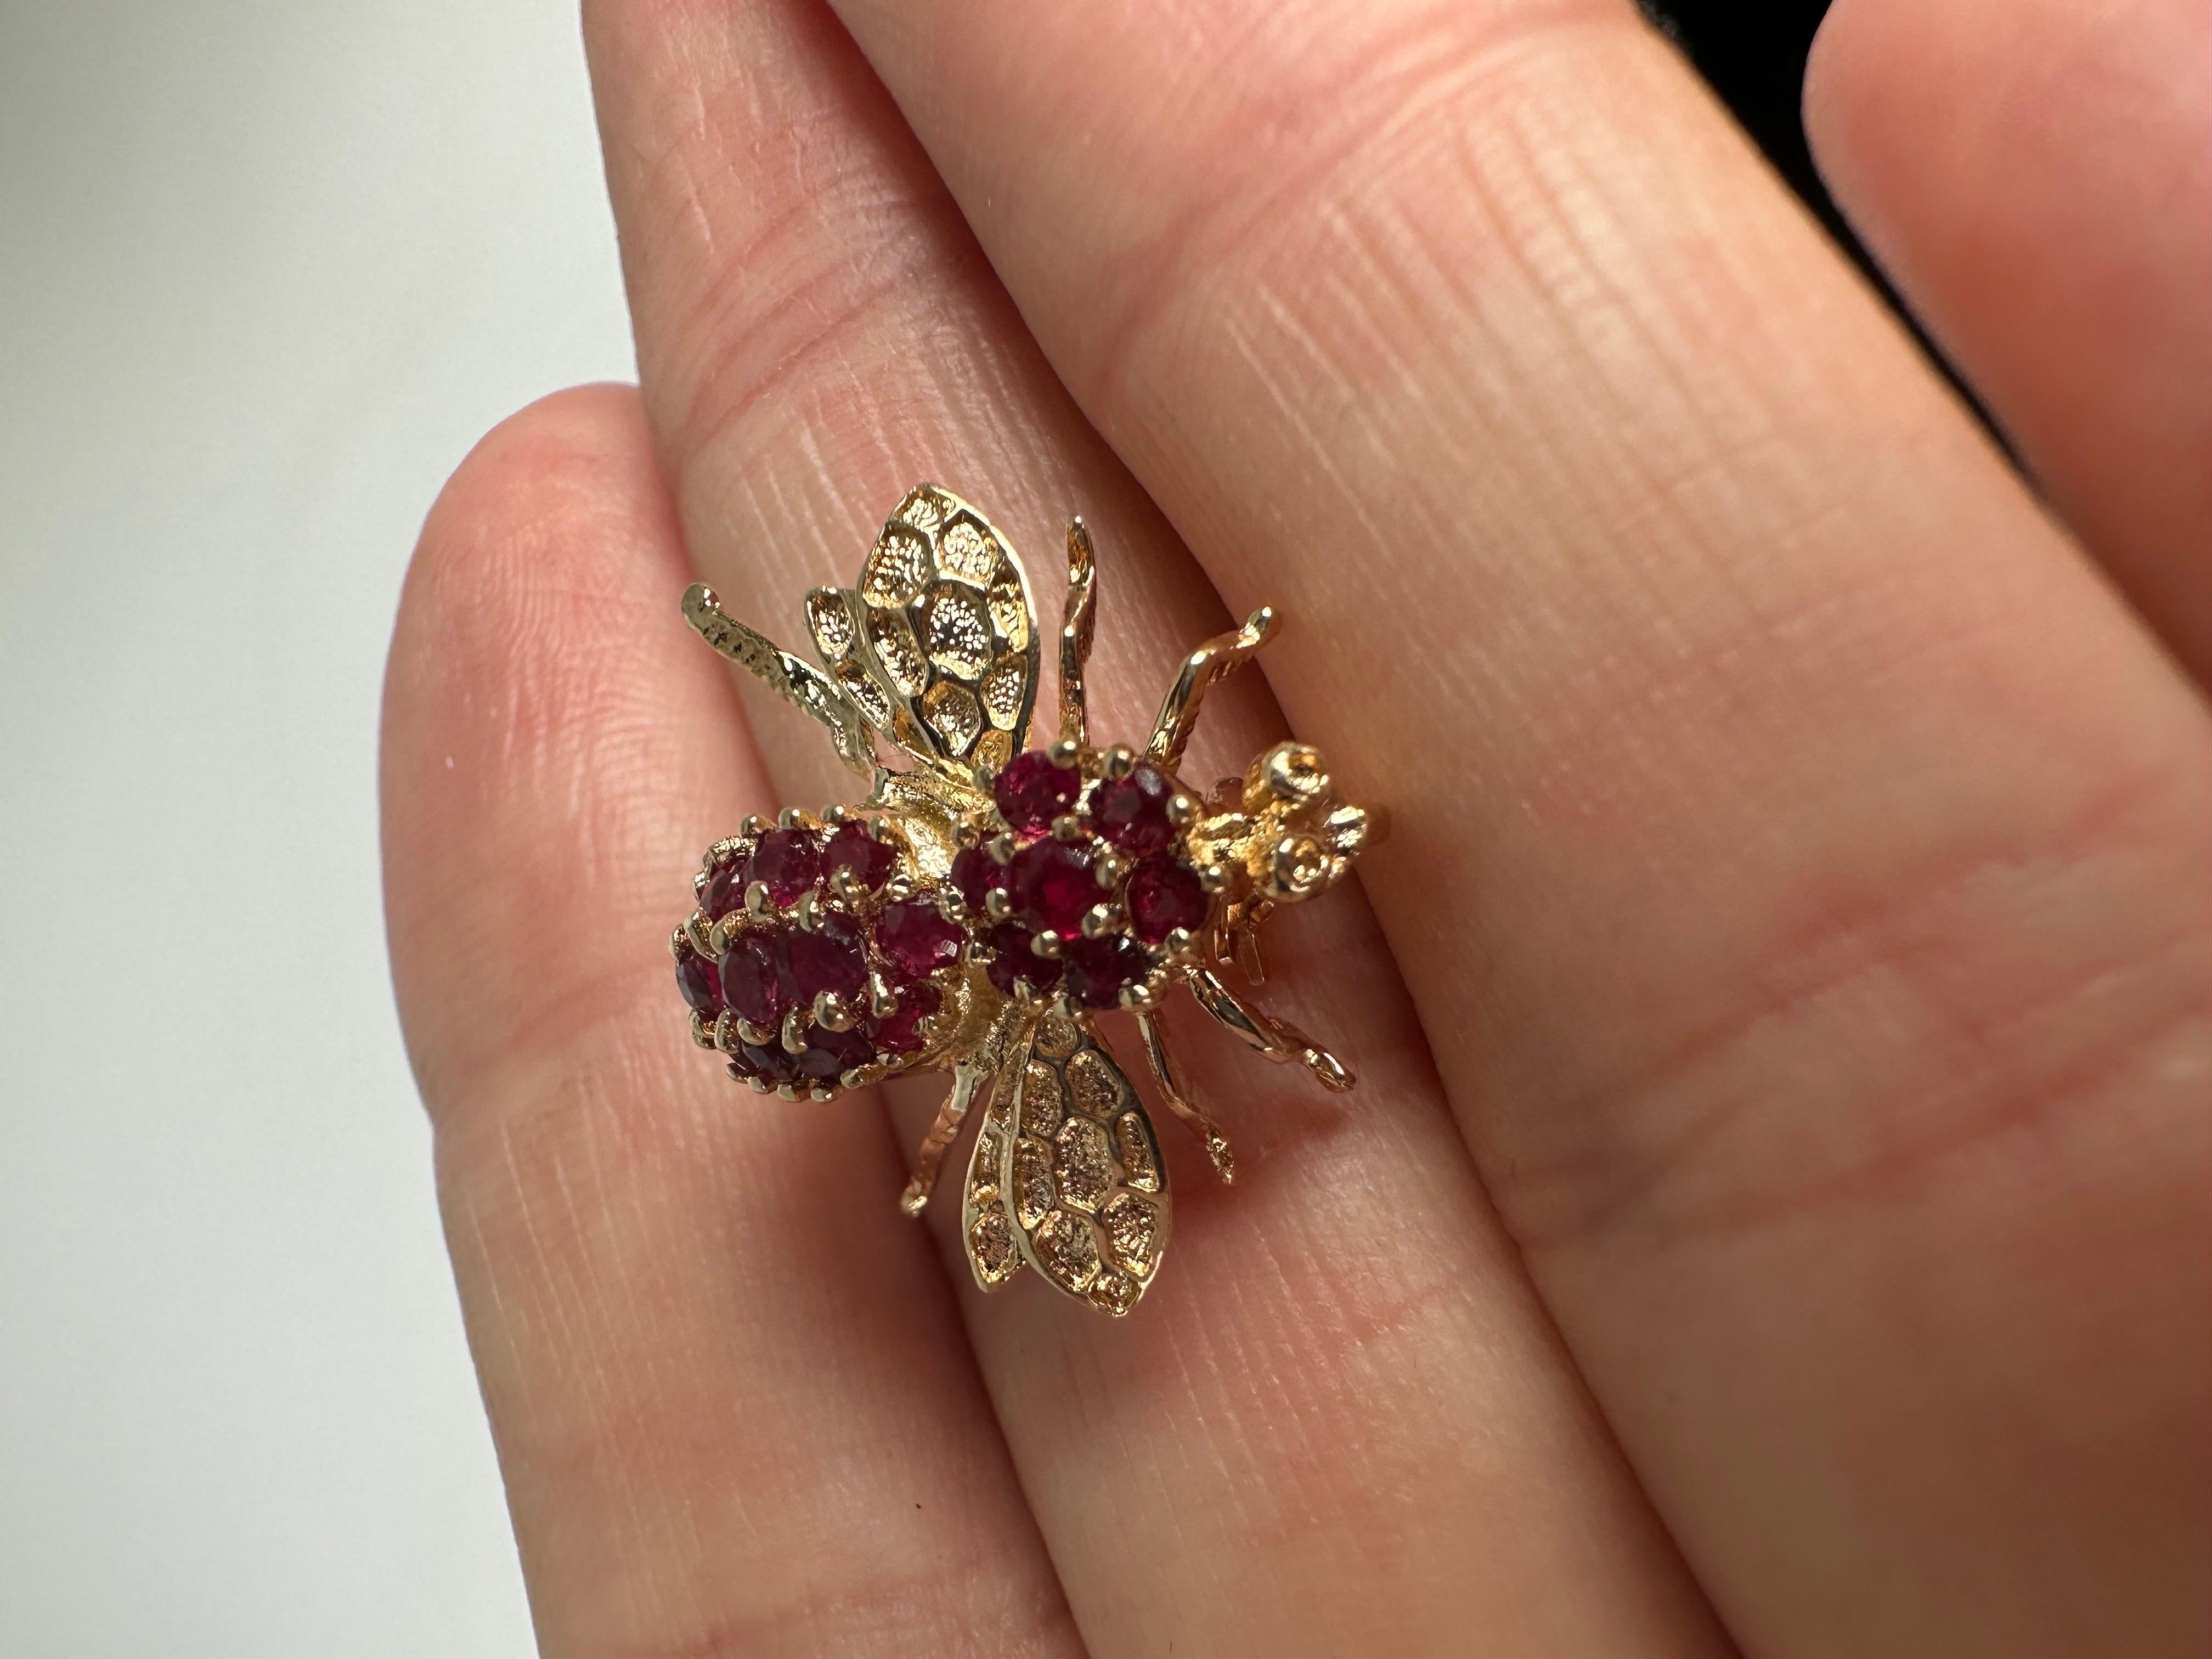 Natural ruby pin in 14KT yellow gold, stunning brooch with vivid rubies!

METAL: 14KT yellow gold
Grams:2.97
Item25000007 mmt

WHAT YOU GET AT STAMPAR JEWELERS:
Stampar Jewelers, located in the heart of Jupiter, Florida, is a custom jewelry store